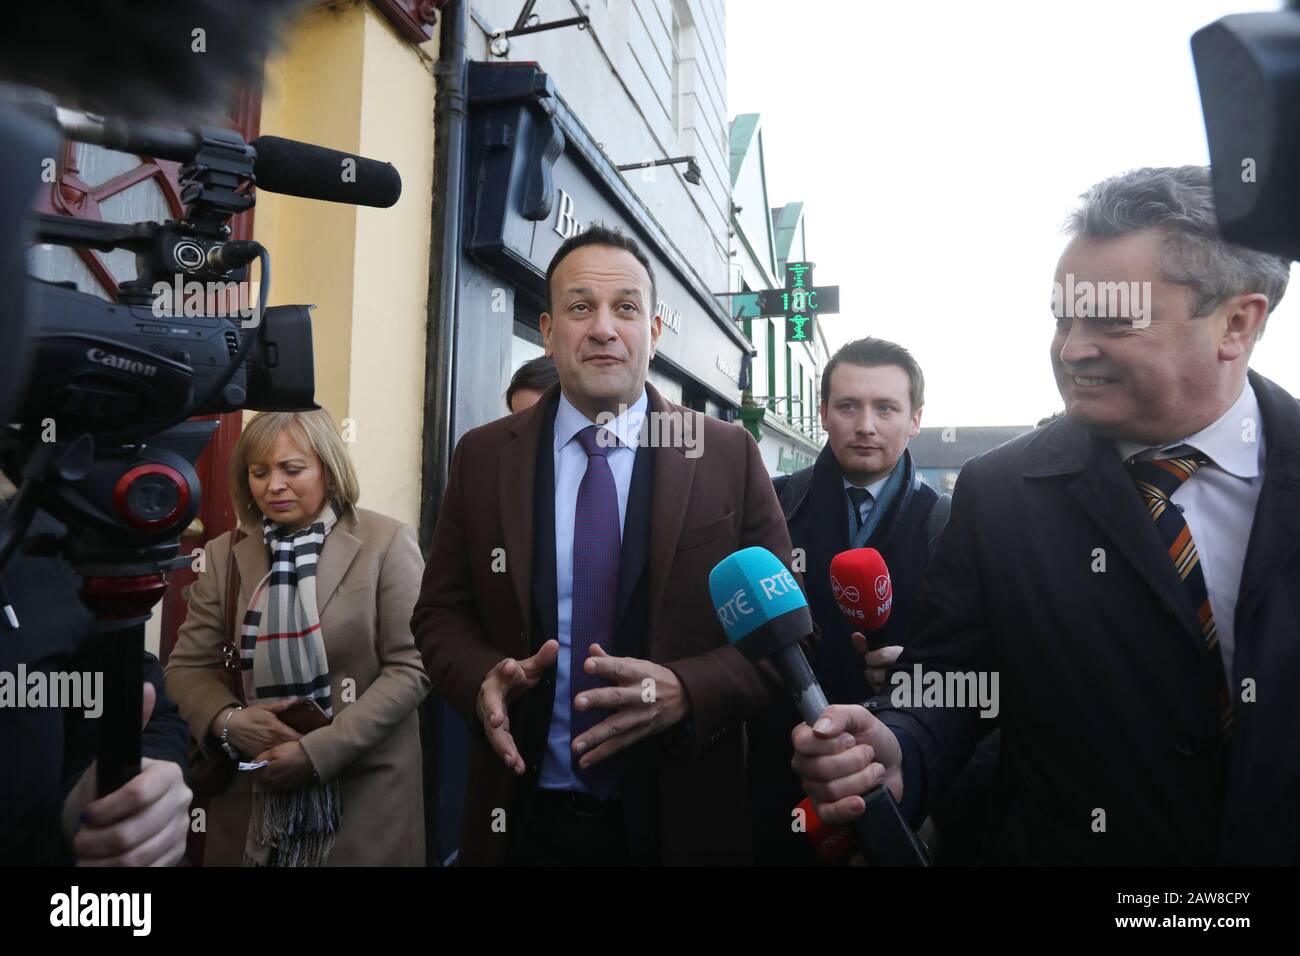 Tullow, Carlow, Ireland. 6/February/2020 General Election 2020. Taoiseach and Fine Gael leader Leo Varadkar, speaks to the media during a canvass of Tullow in County Carlow. Photo: Eamonn Farrell/RollingNews.ie/Alamy Live News Stock Photo